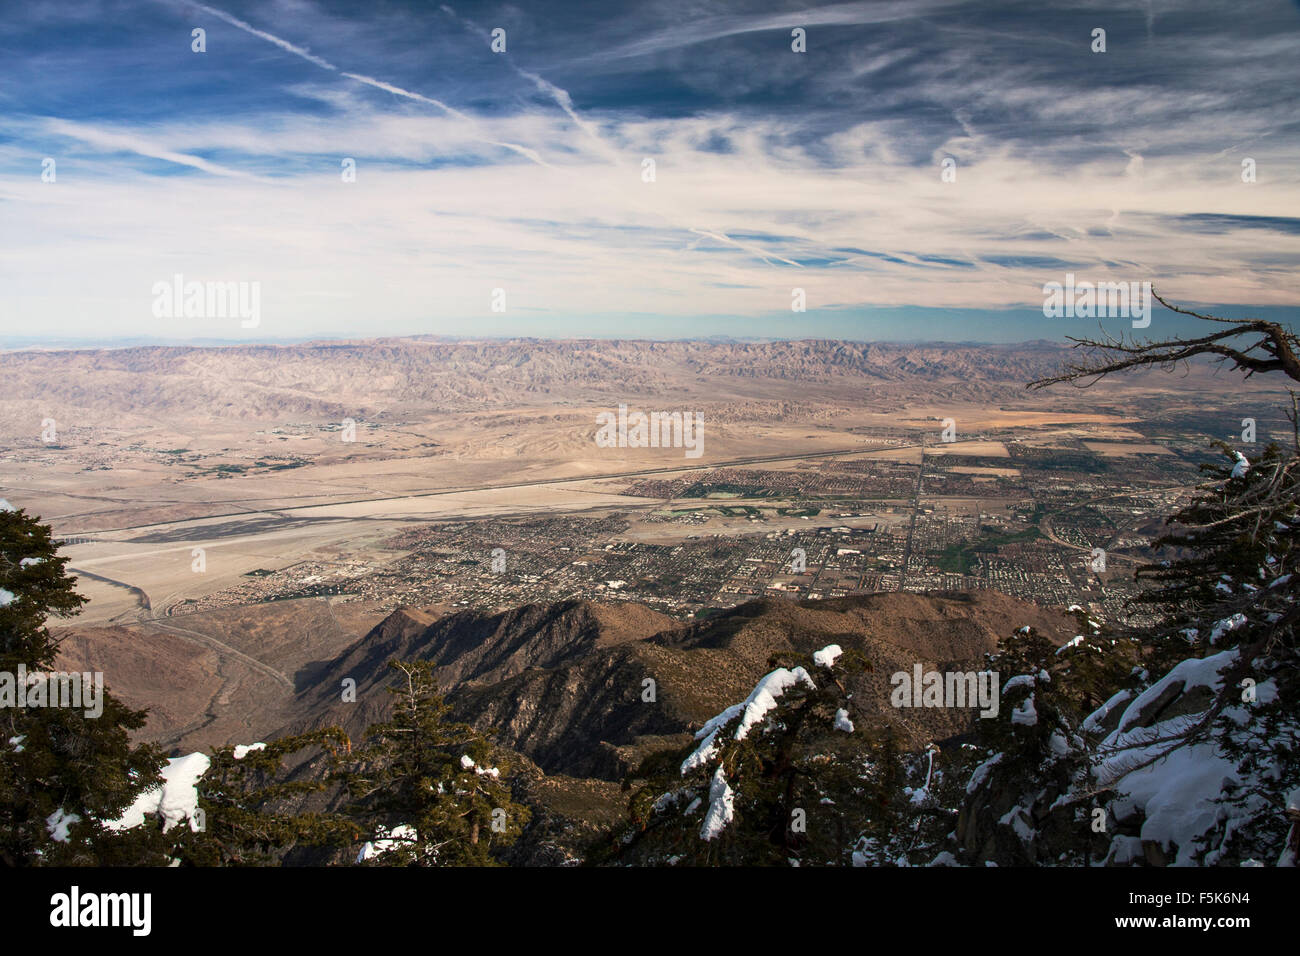 Mount Jacinto with snow covered peaks overlooking the airport and desert of Palm Springs below Stock Photo